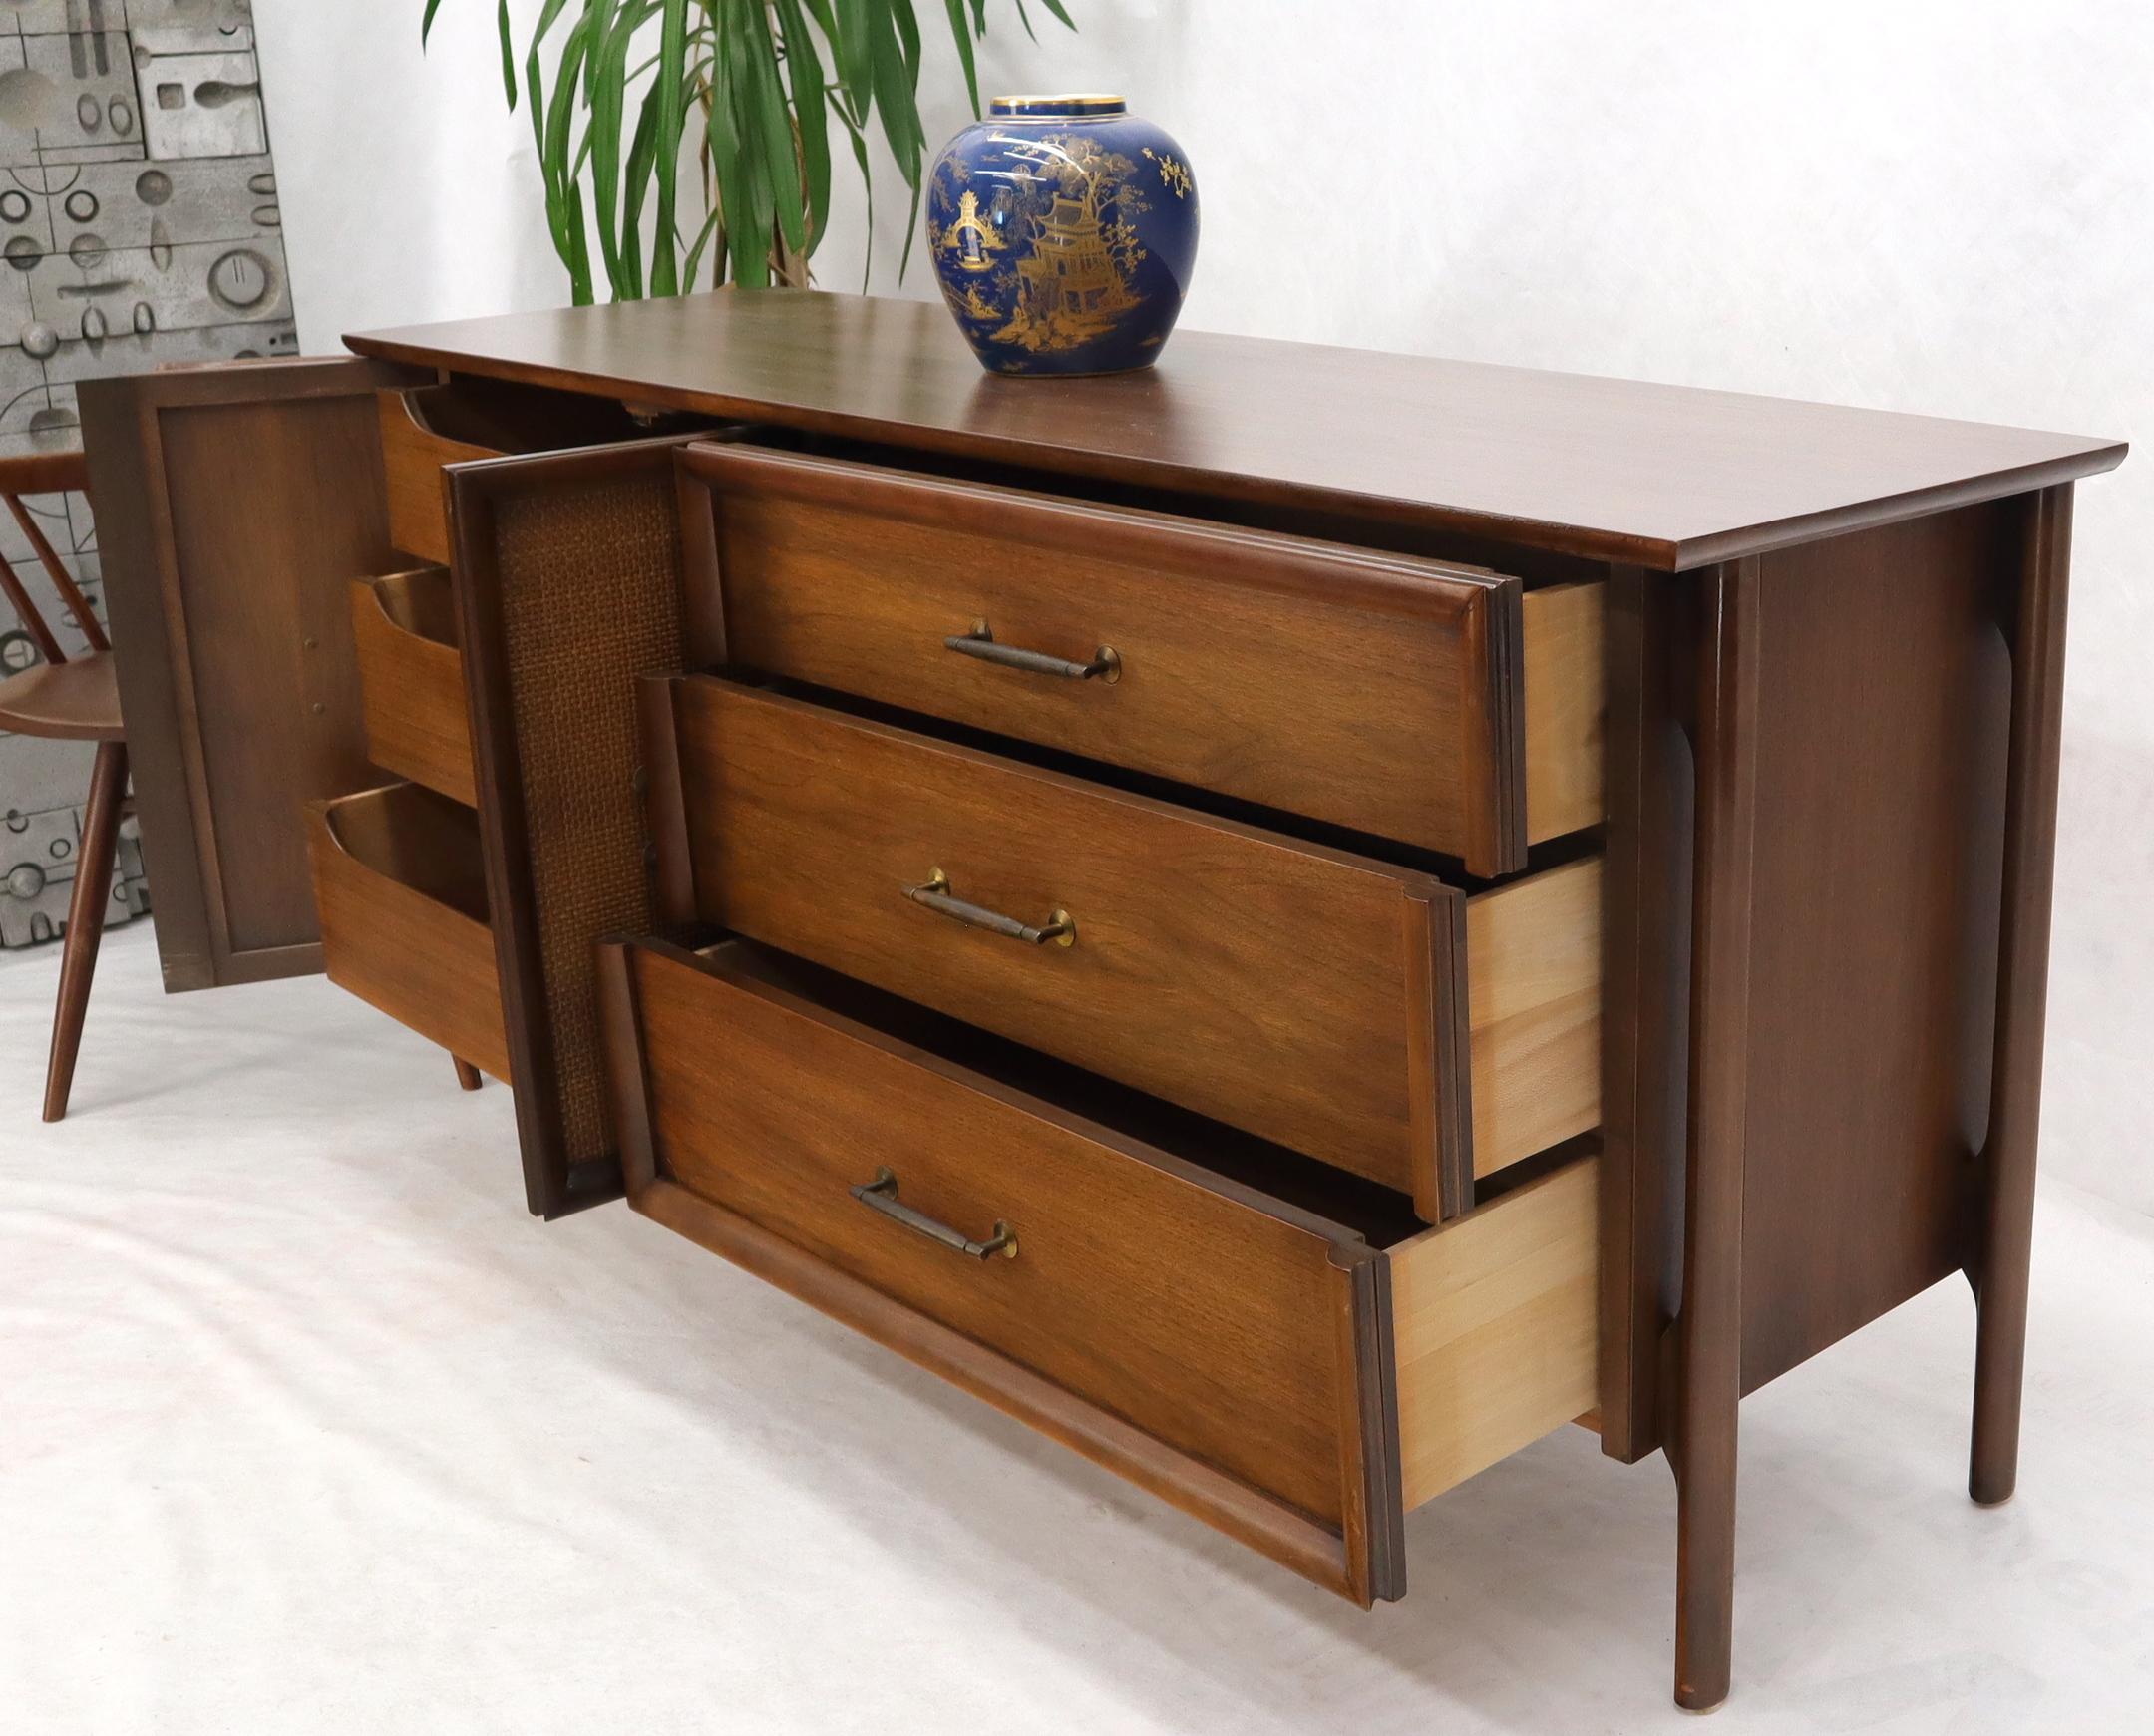 20th Century Decorative Caned Door Front Exposed Legs Walnut Credenza Dreser For Sale